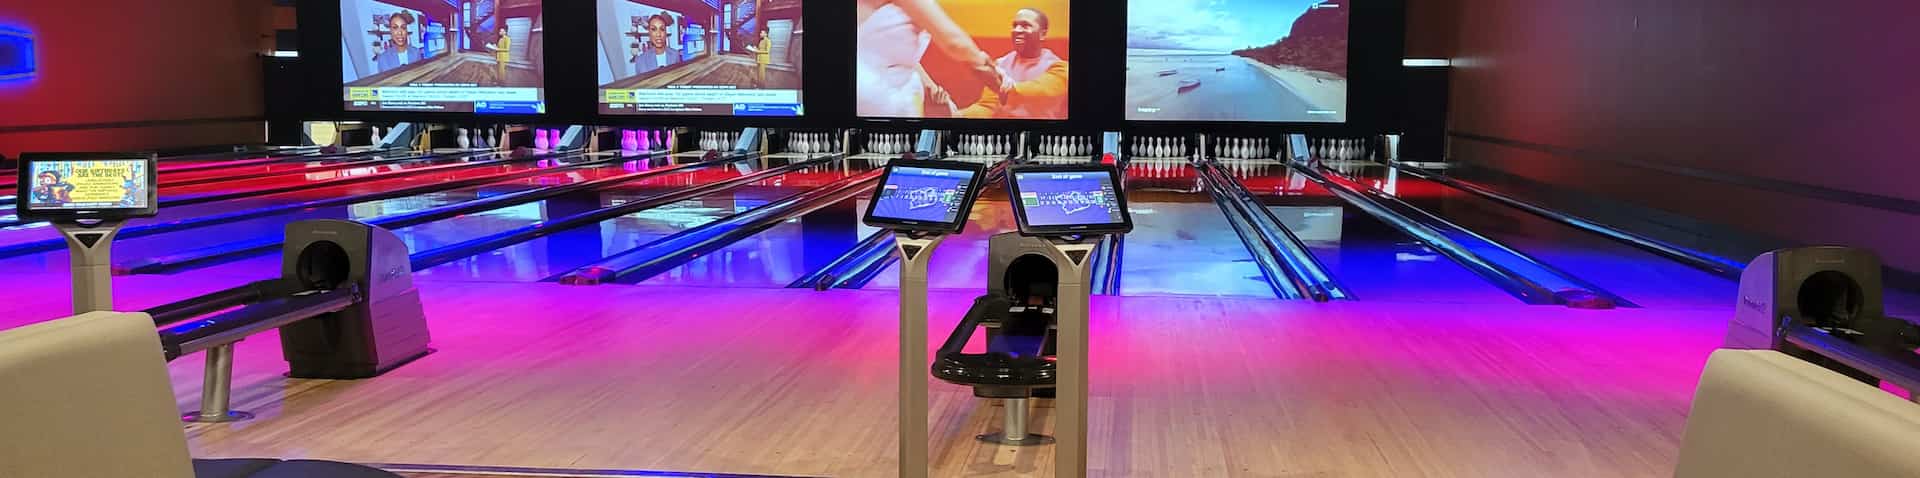 bowling lanes lit up with pink and other colors with TVs in background